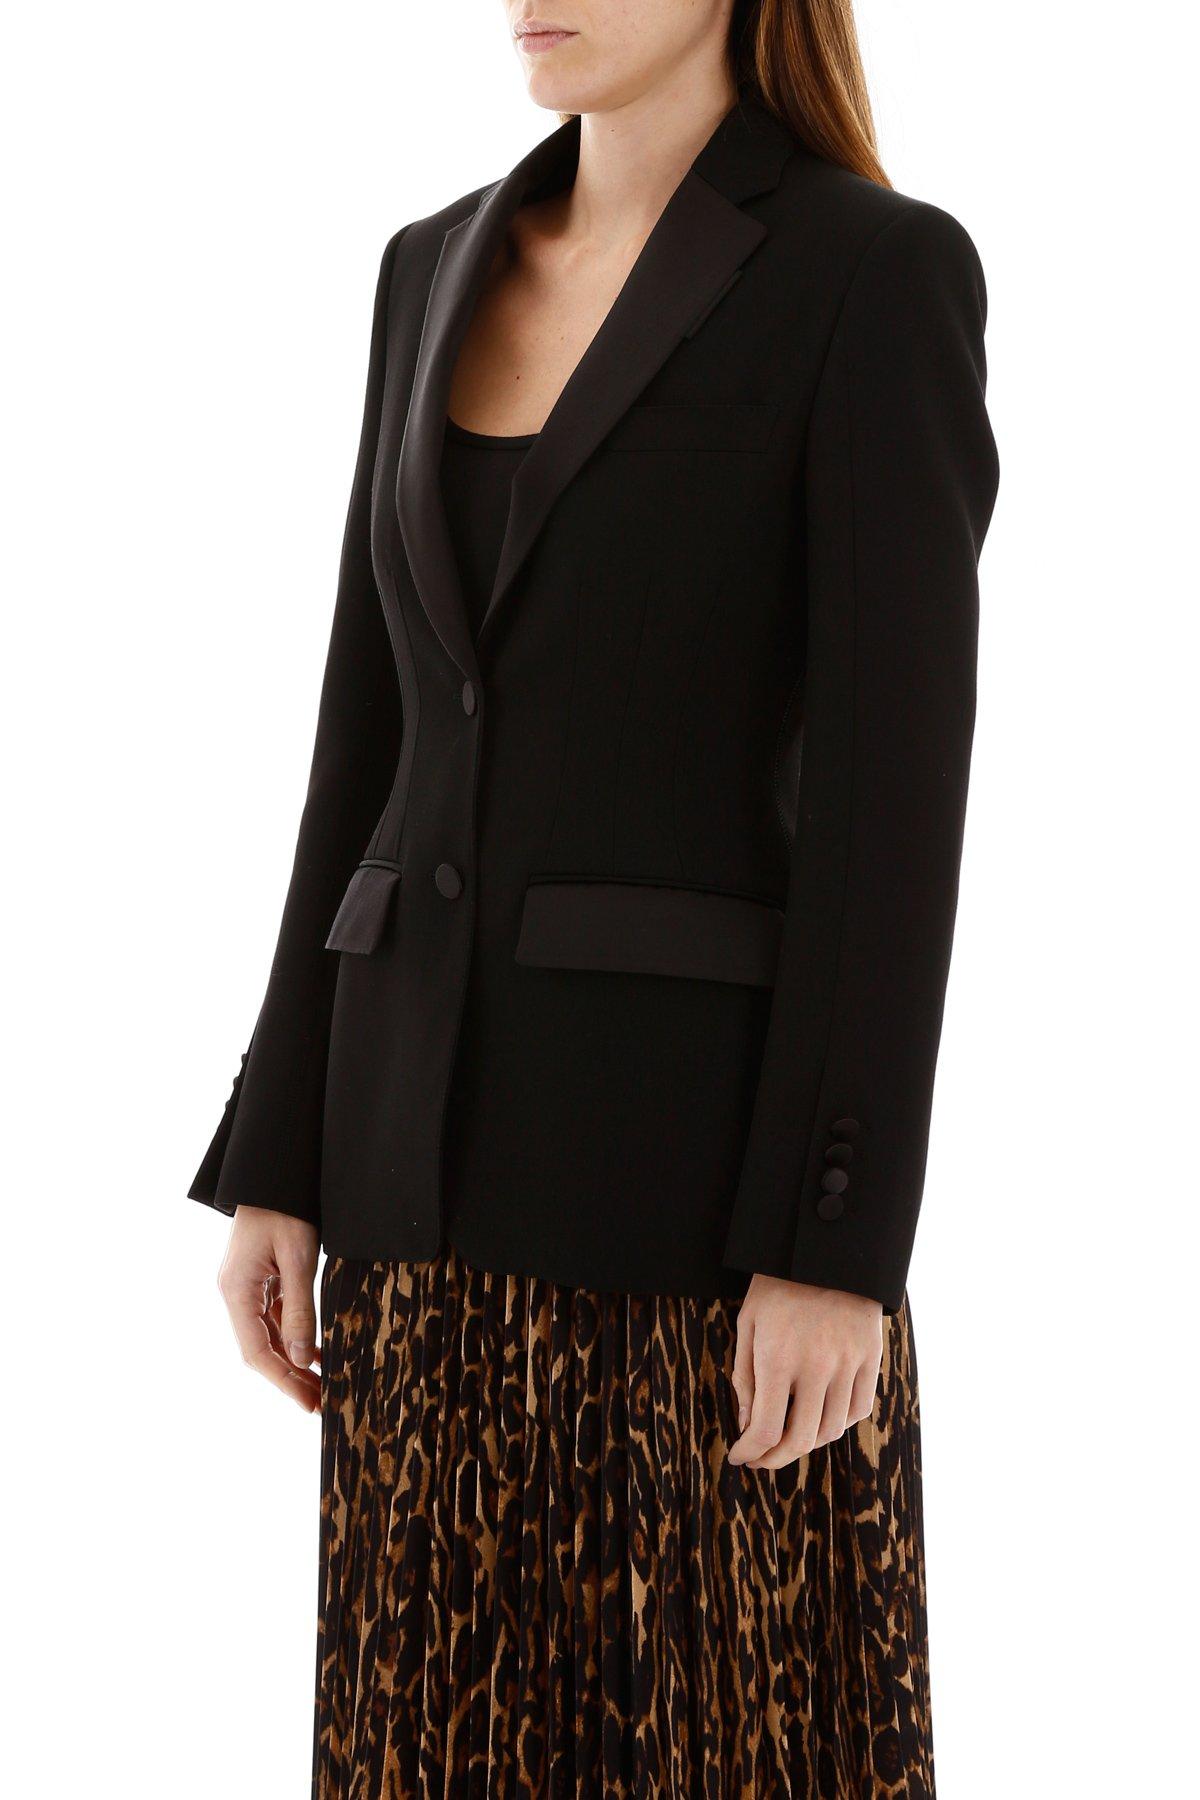 Burberry Wool Tailoring Blazer in Black - Save 25% - Lyst